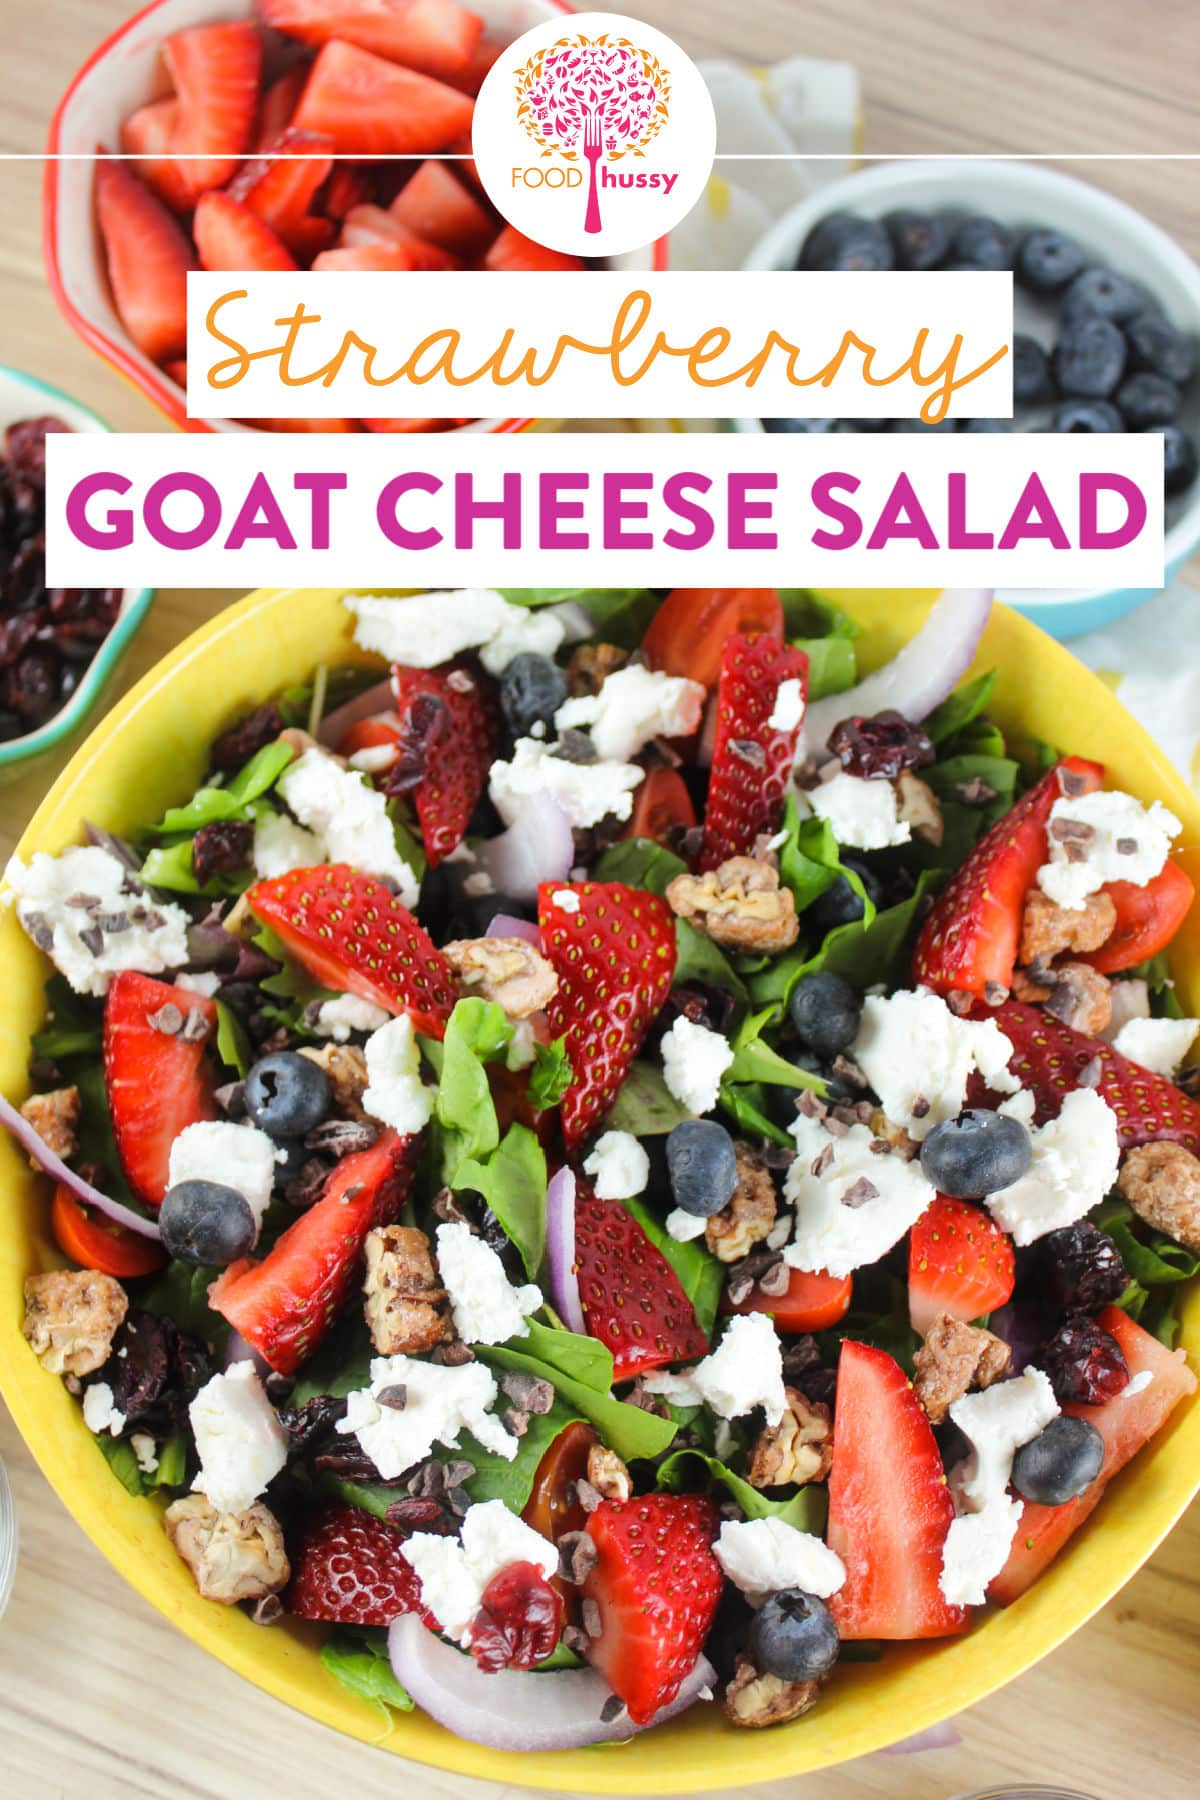 This Strawberry Goat Cheese Salad is a favorite in my house! It's a copycat of a restaurant salad that's local here in Cinci - the taste of spring with strawberries, blueberries and tomatoes plus a couple of surprises!
 via @foodhussy